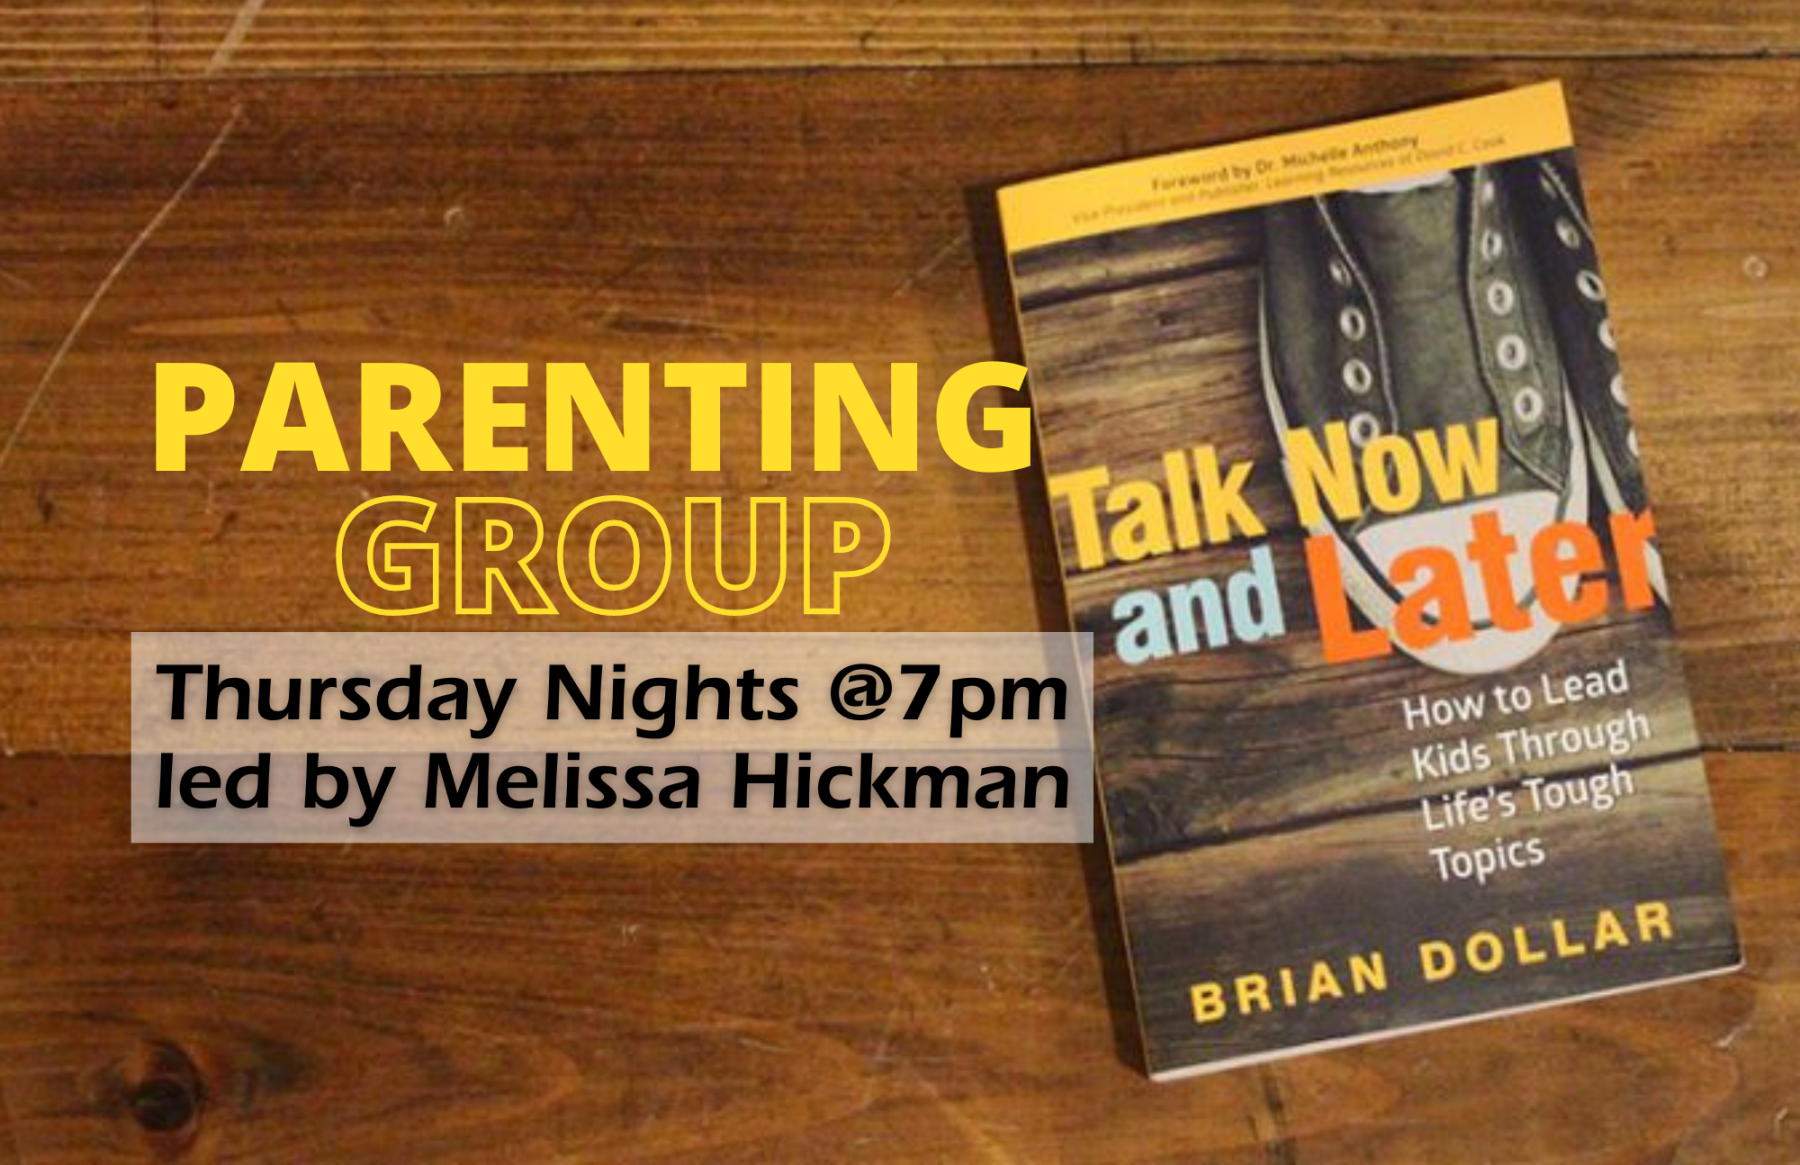 Talk Now & Later - Parenting Study